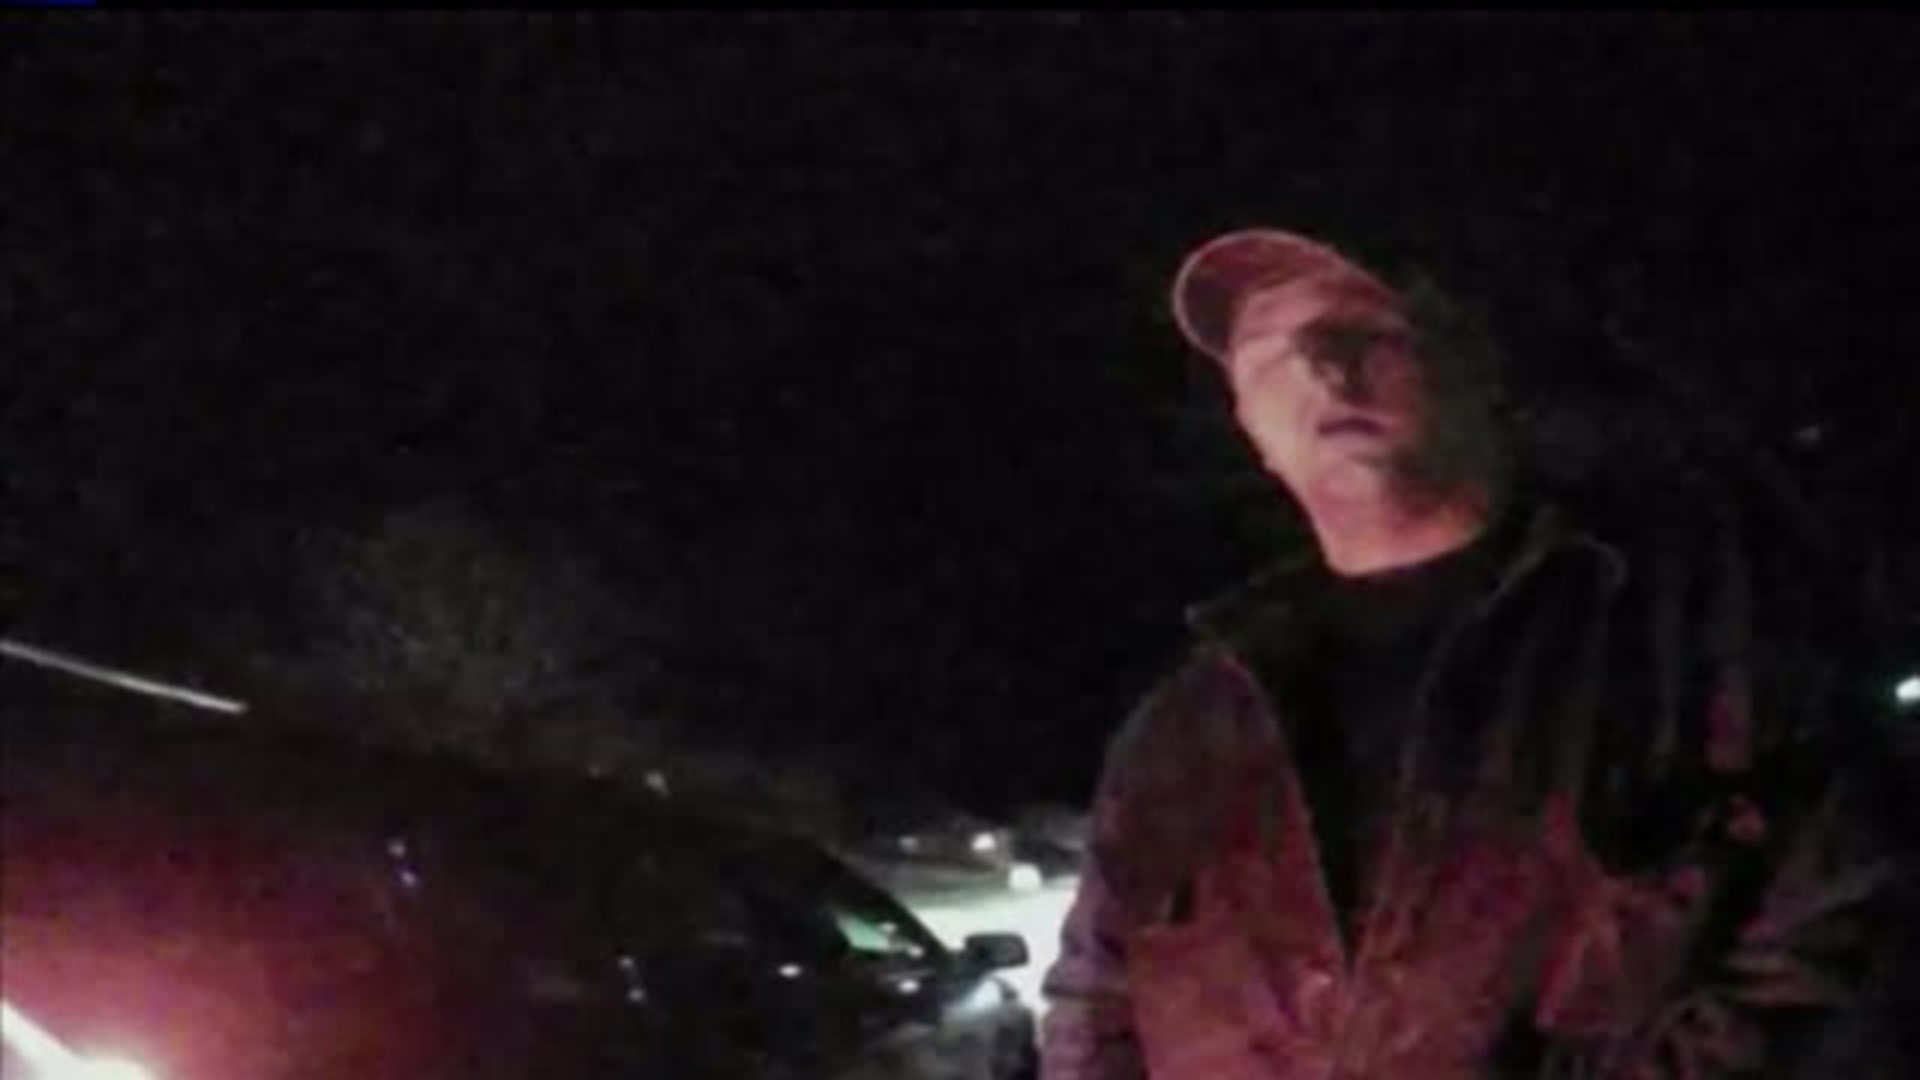 Video released of former trooper pulled over for DUI